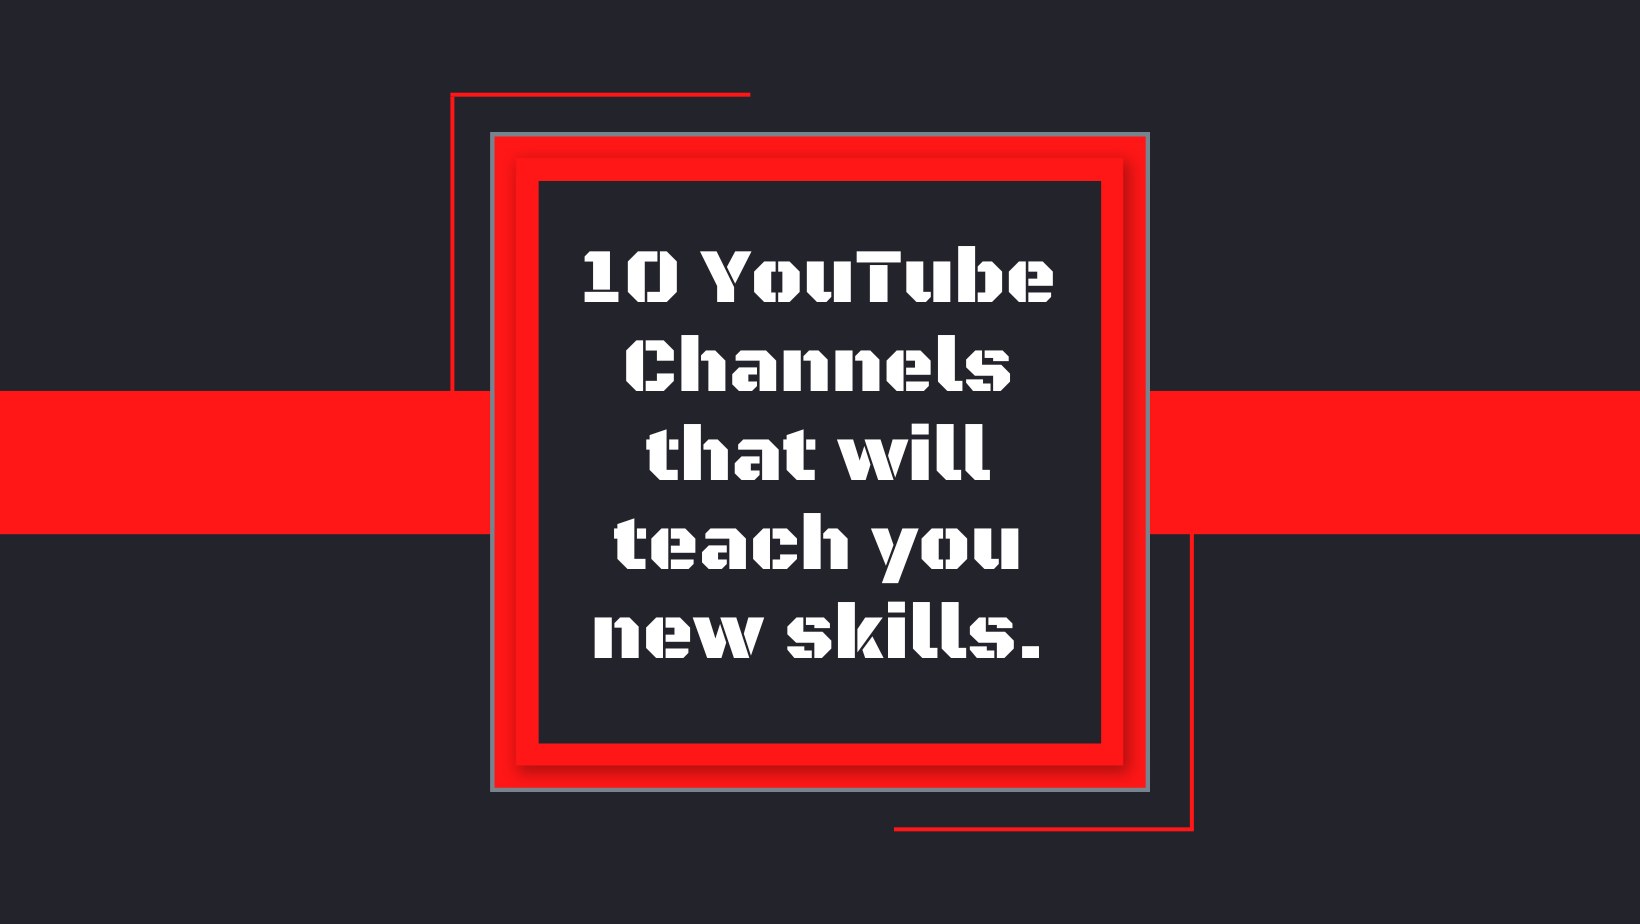 10 YouTube Channels that will teach you new skills.